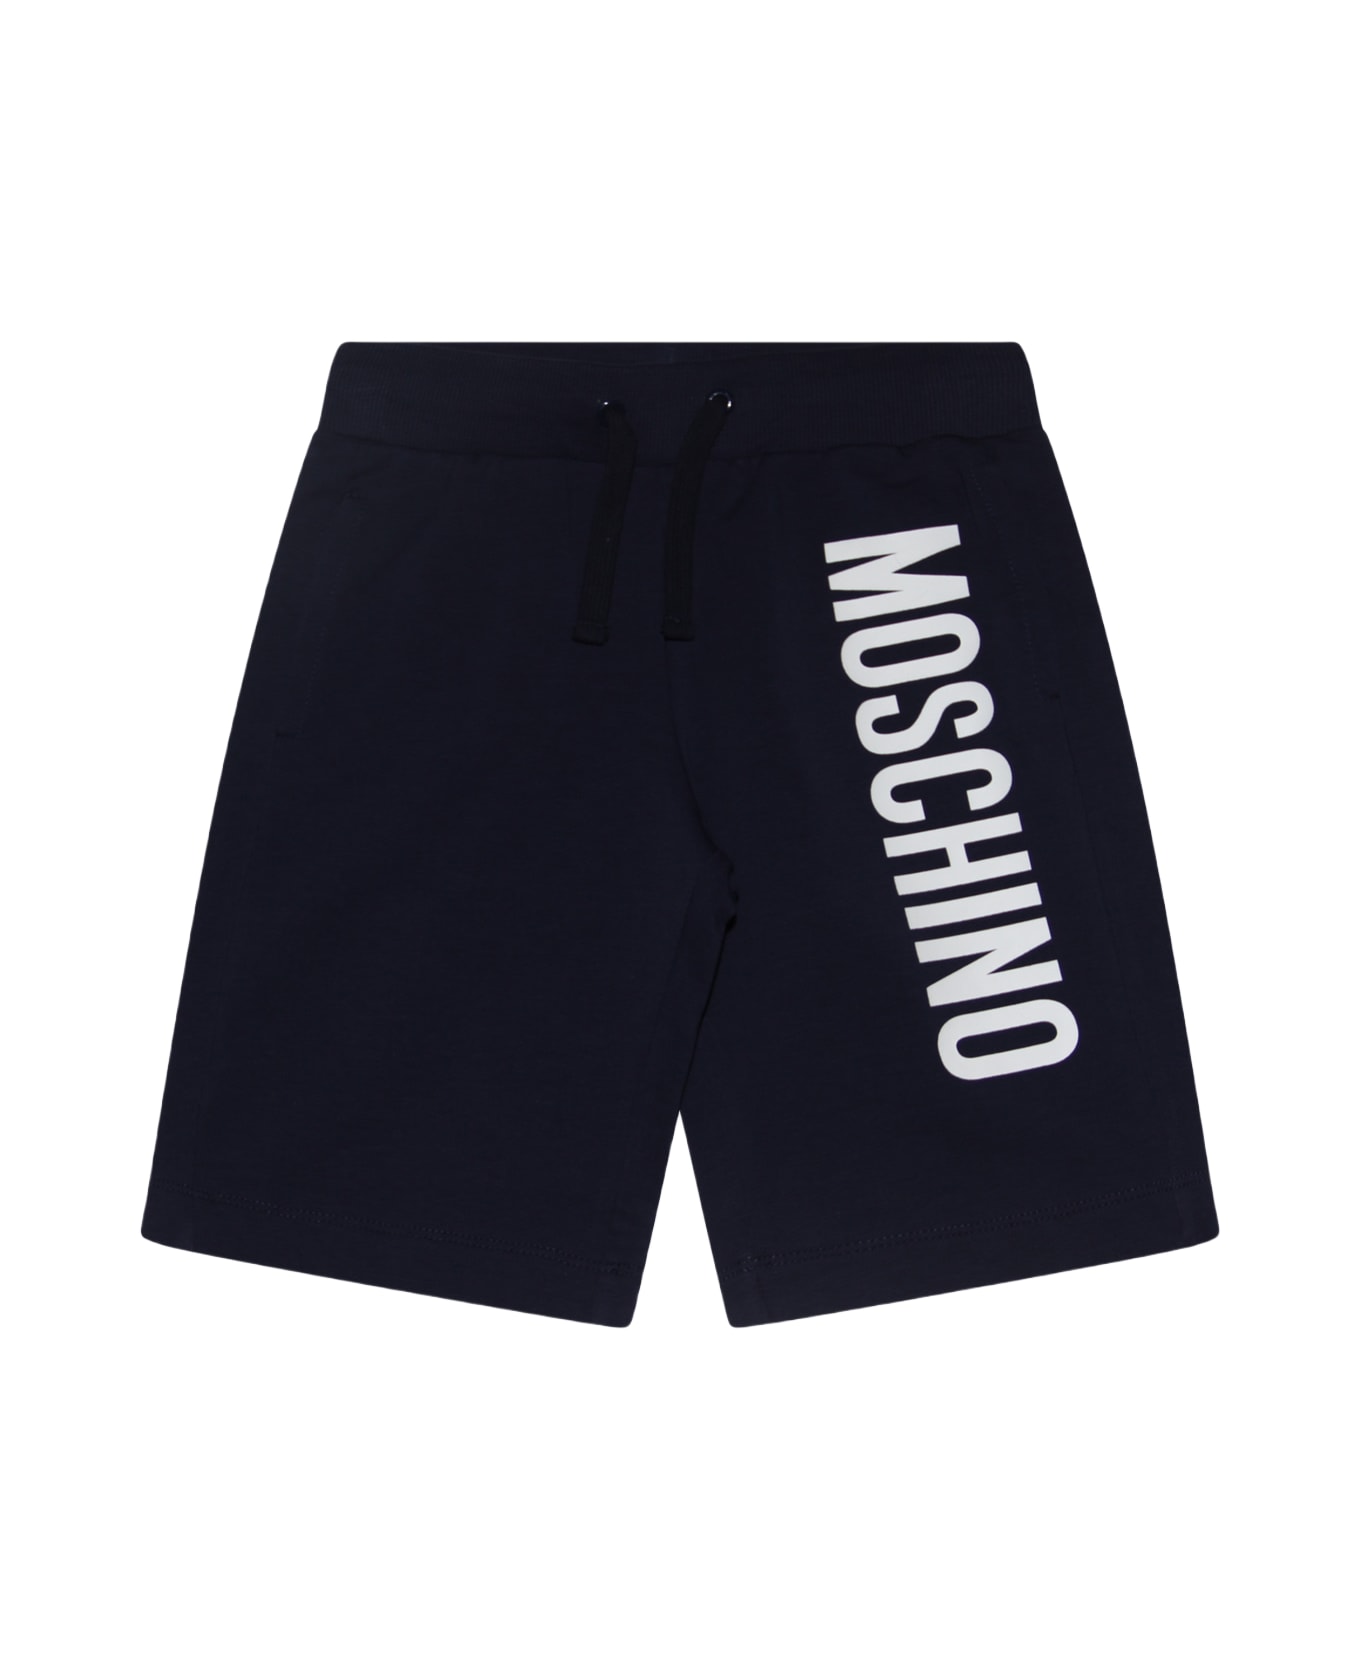 Moschino Navy Blue And White Cotton Blend Track Shorts - Blue ボトムス